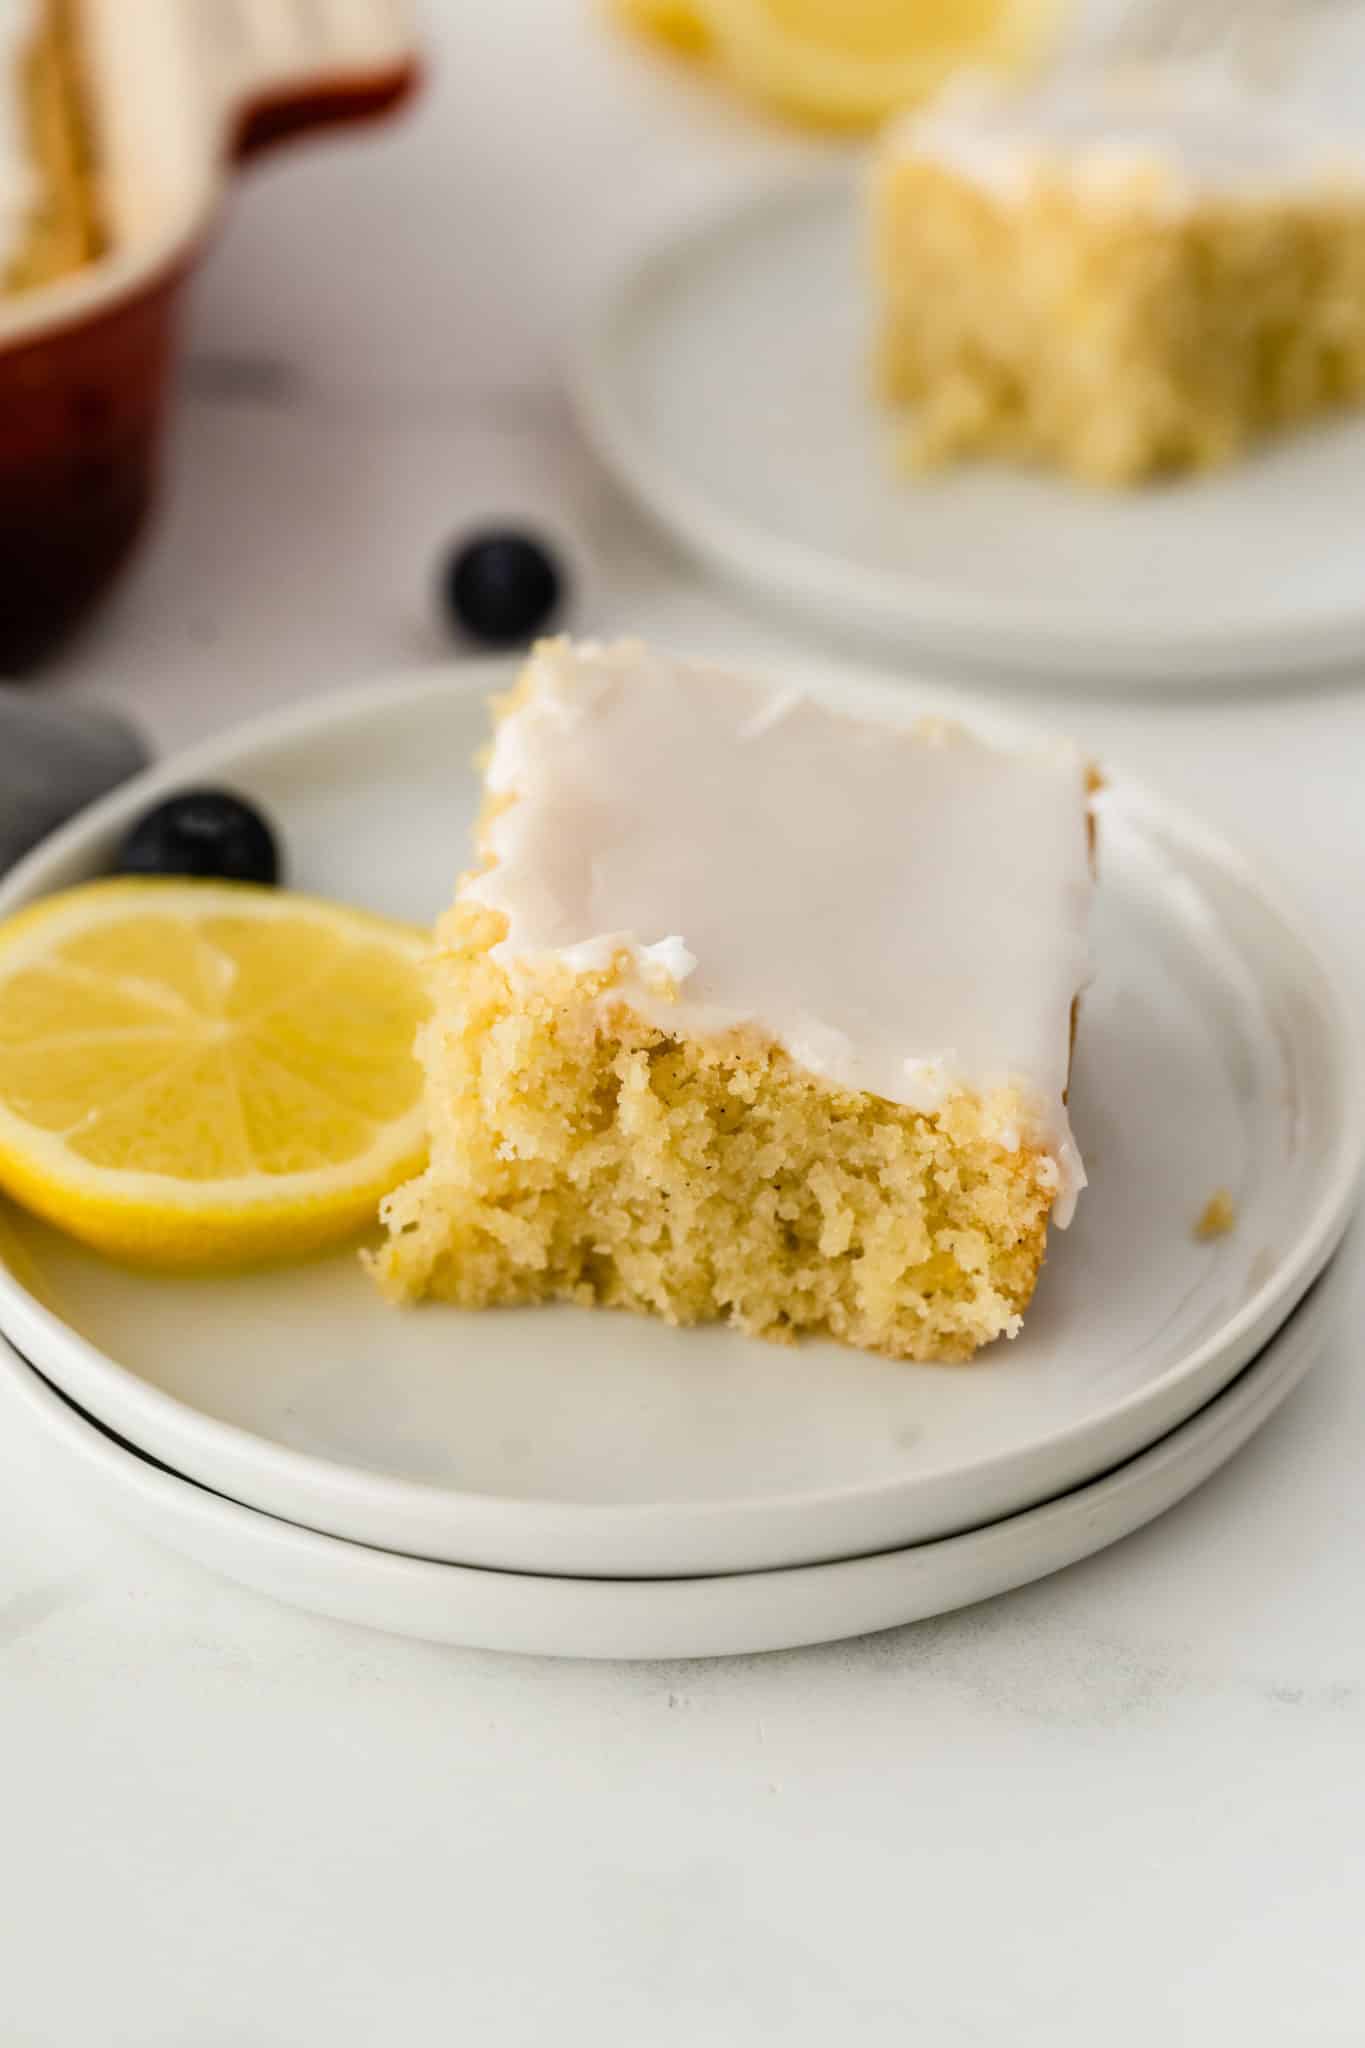 slice of gluten-free lemon cake with icing on top served with a piece of fresh lemon.